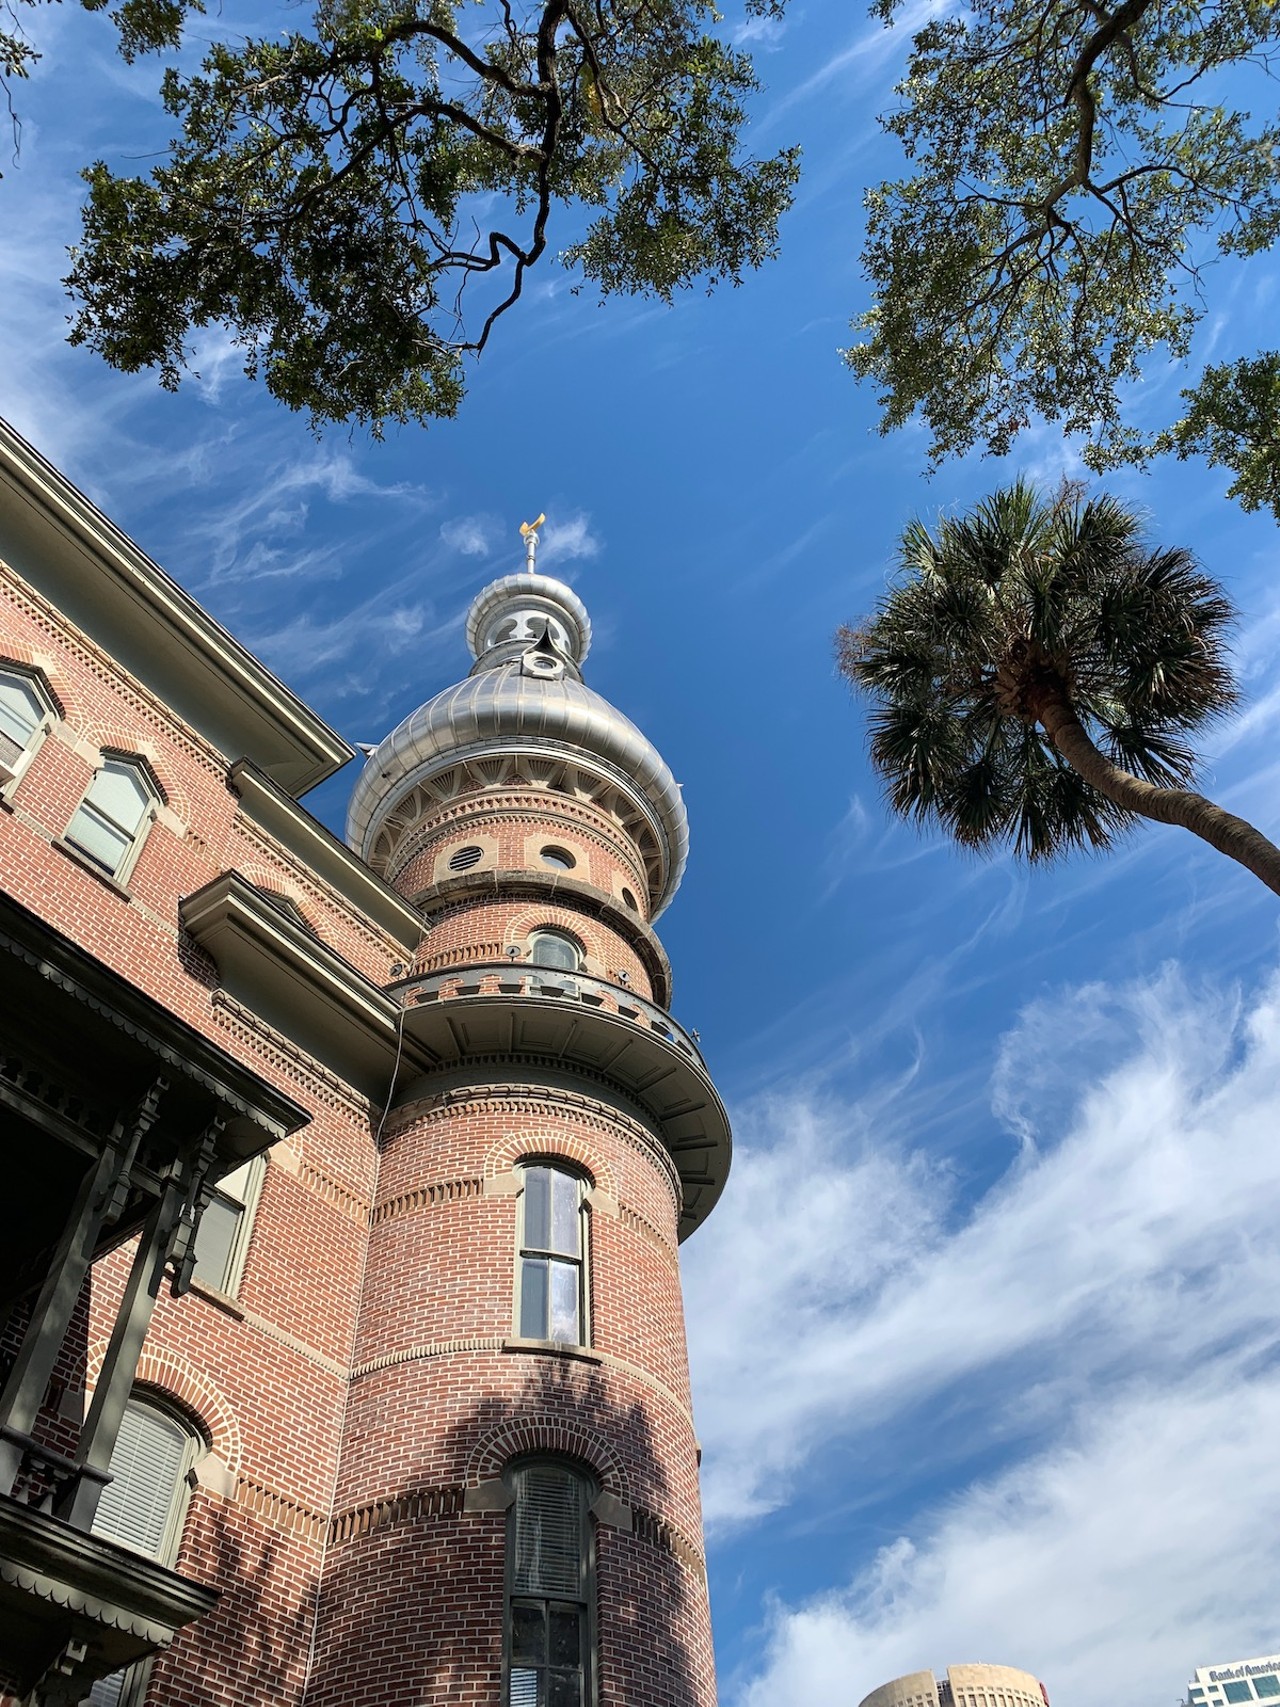 Go back in time and take the tour at the Plant Museum401 W Kennedy Blvd., Tampa. (813) 254-1891 We've all seen the minarets of the old Tampa Bay Hotel, and while most of the space is now the University of Tampa, there's a corner that's all museum. Take the tour and see how it all began.